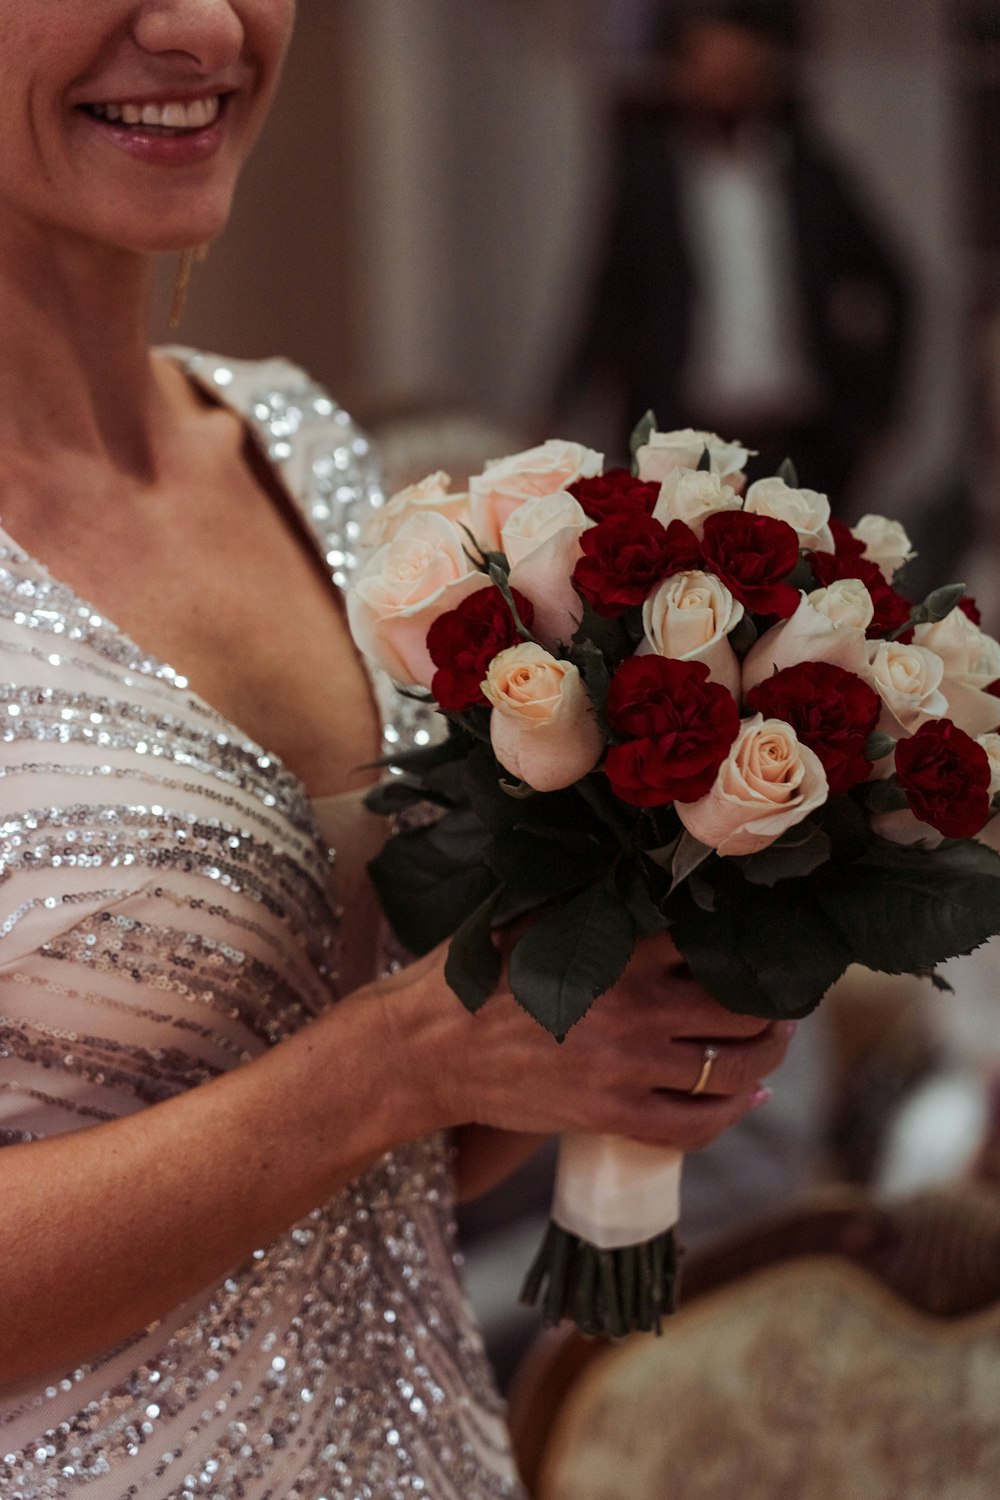 a woman holding a bouquet of roses in her hands